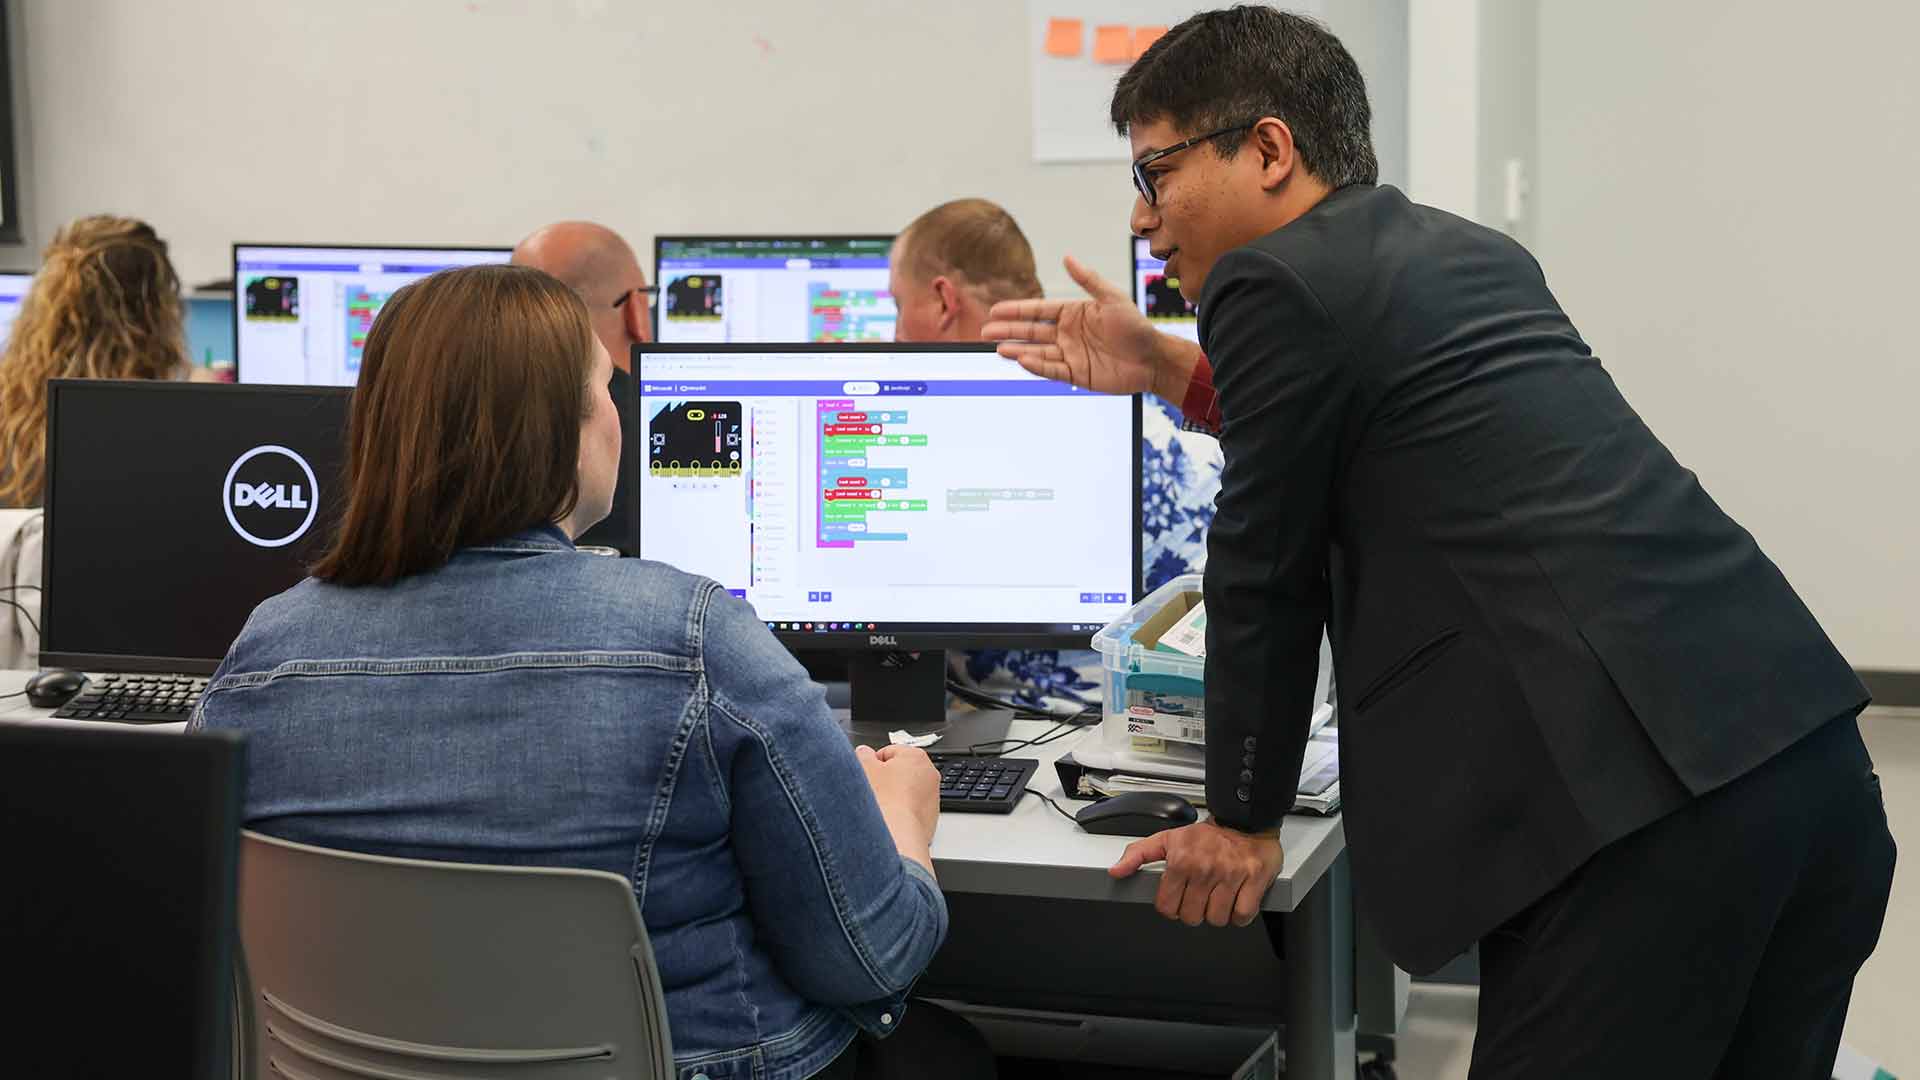 A professor instructs a student during a computer science workshop.